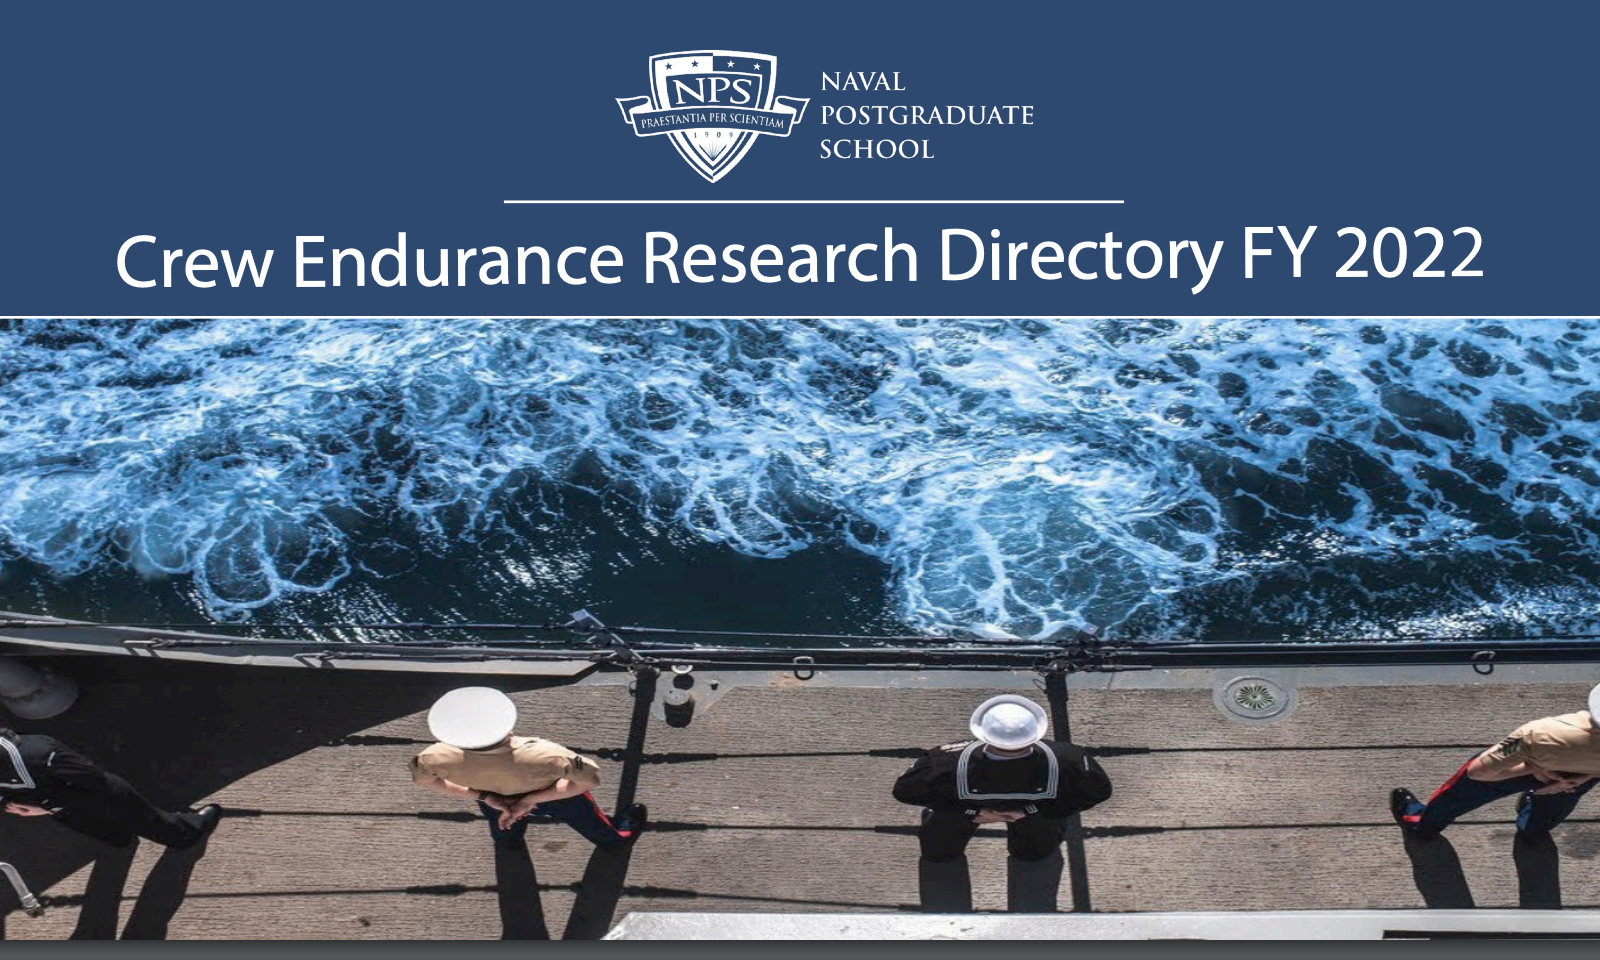 Download: Crew Endurance Research Directory FY2022